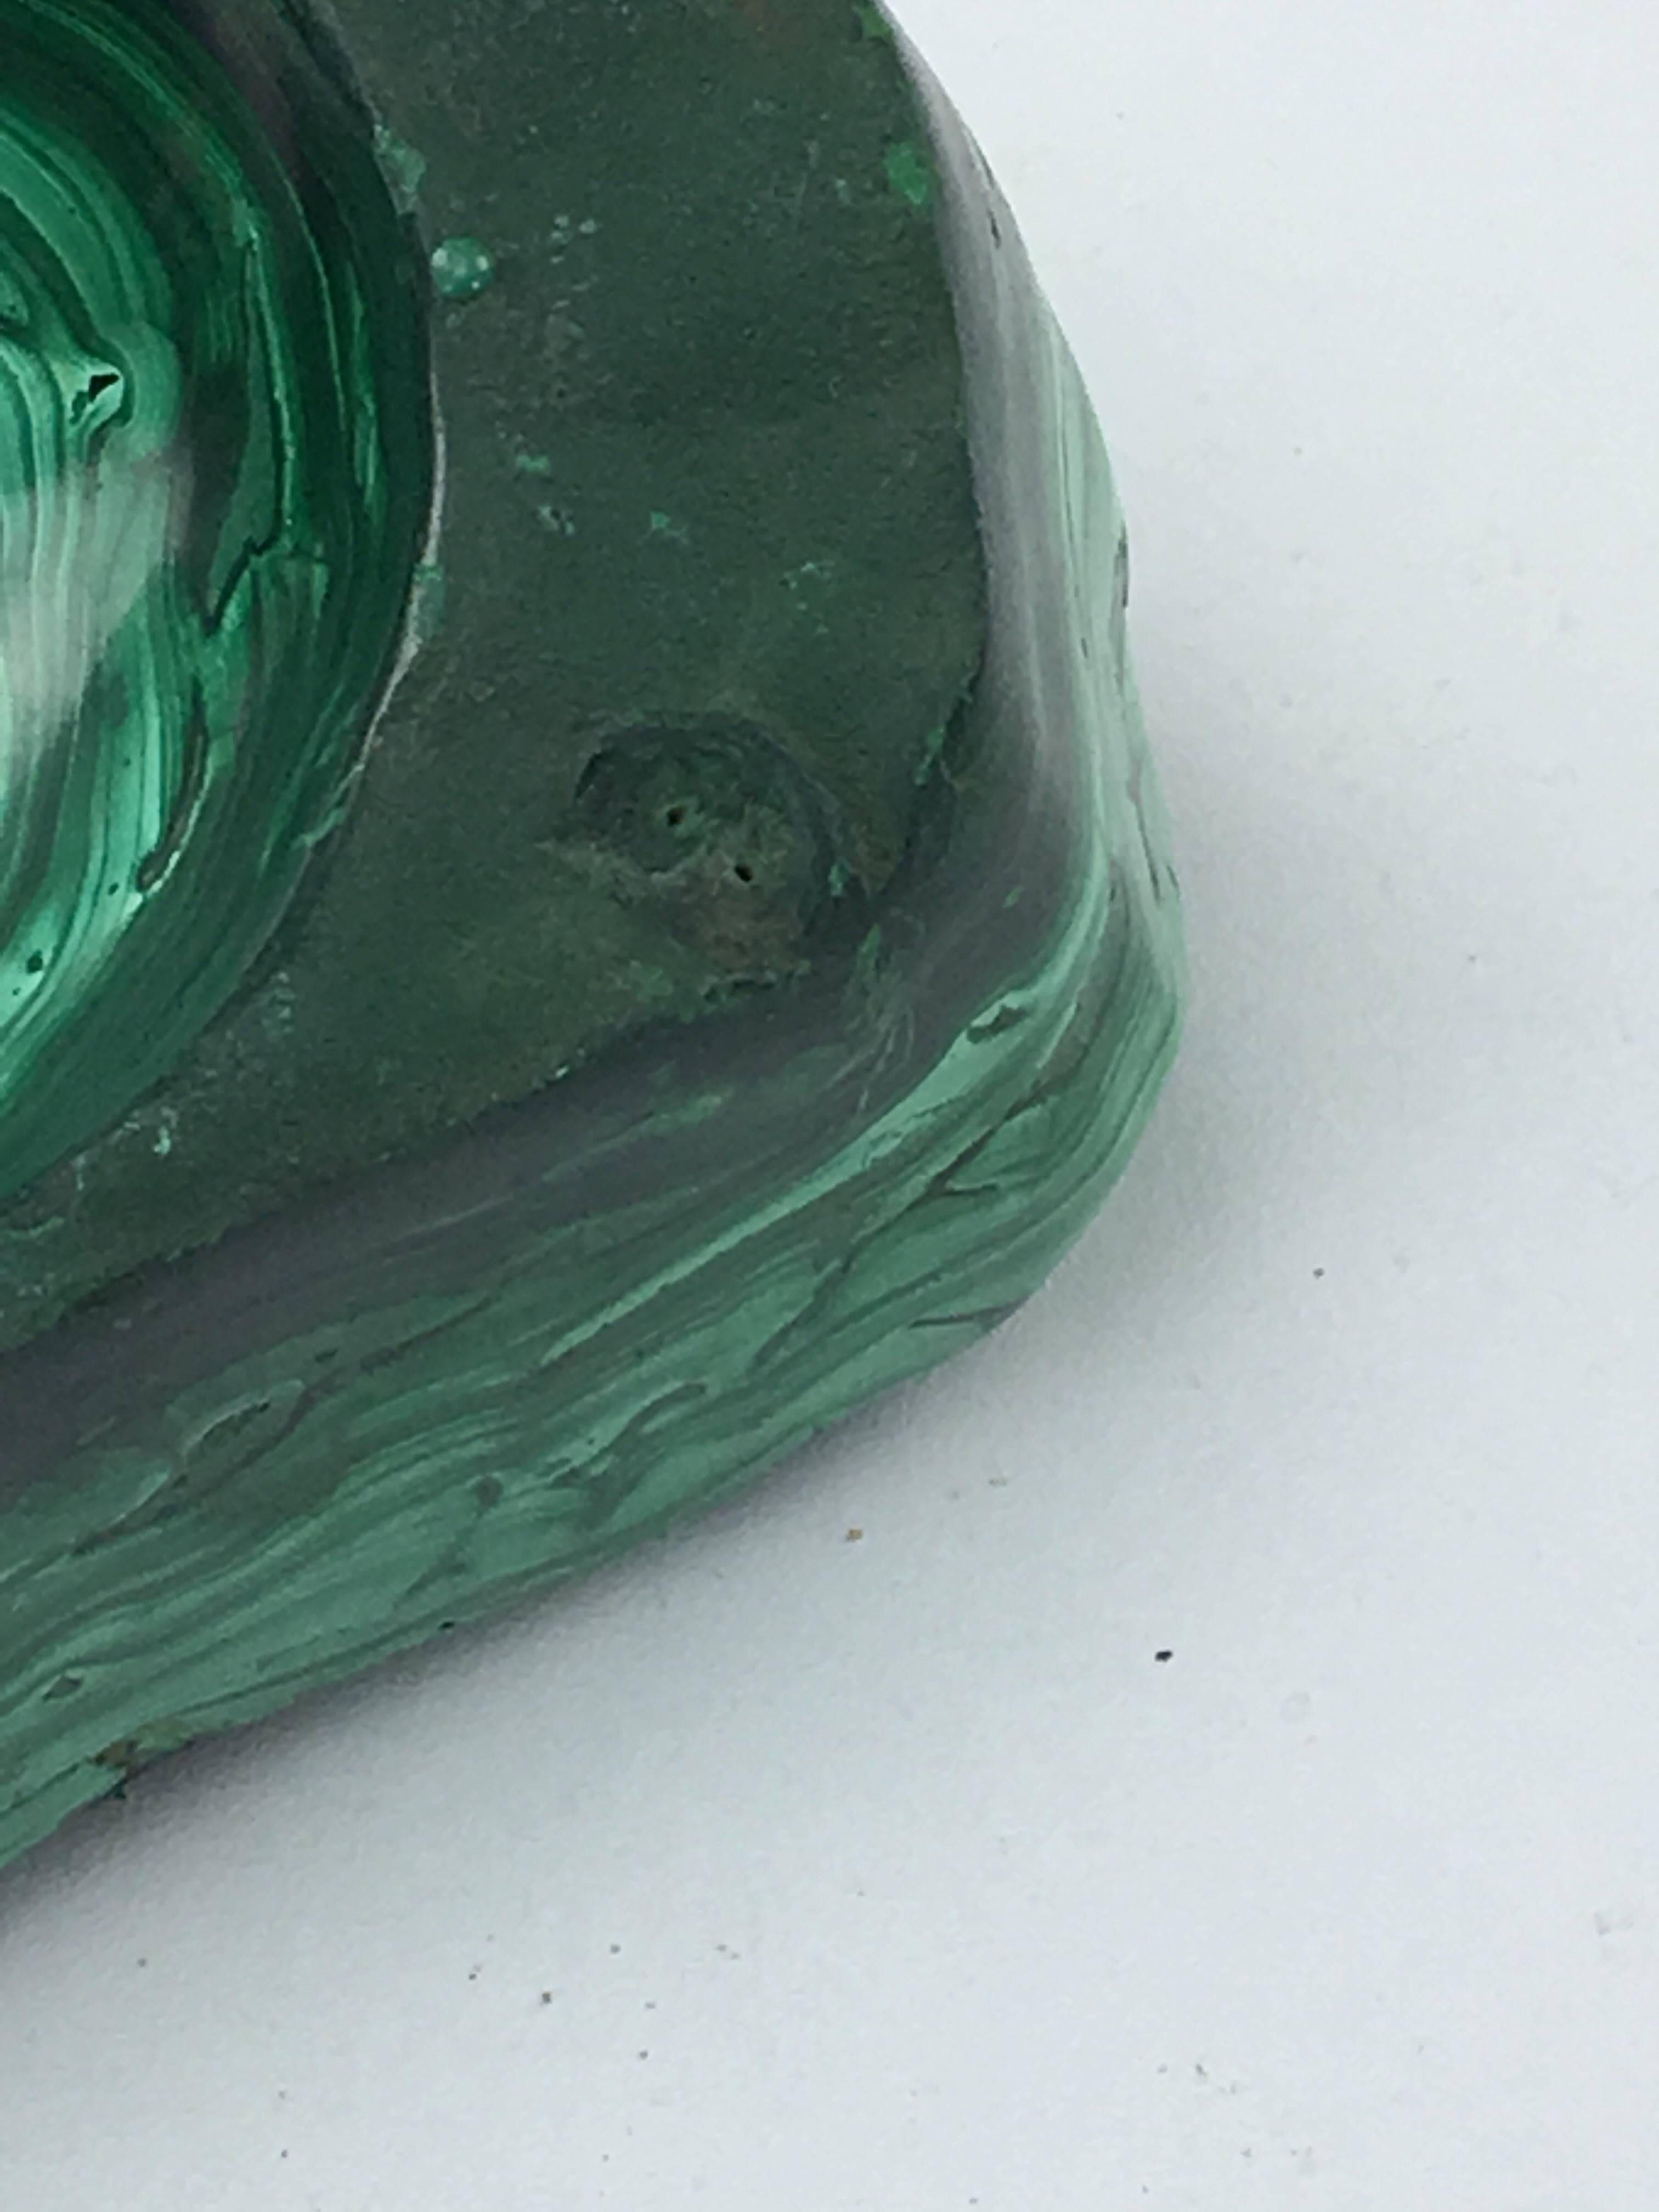 Large malachite ashtray or vide poche. Large size, very heavy; item rare for these reasons.
Natural malachite sculpture.